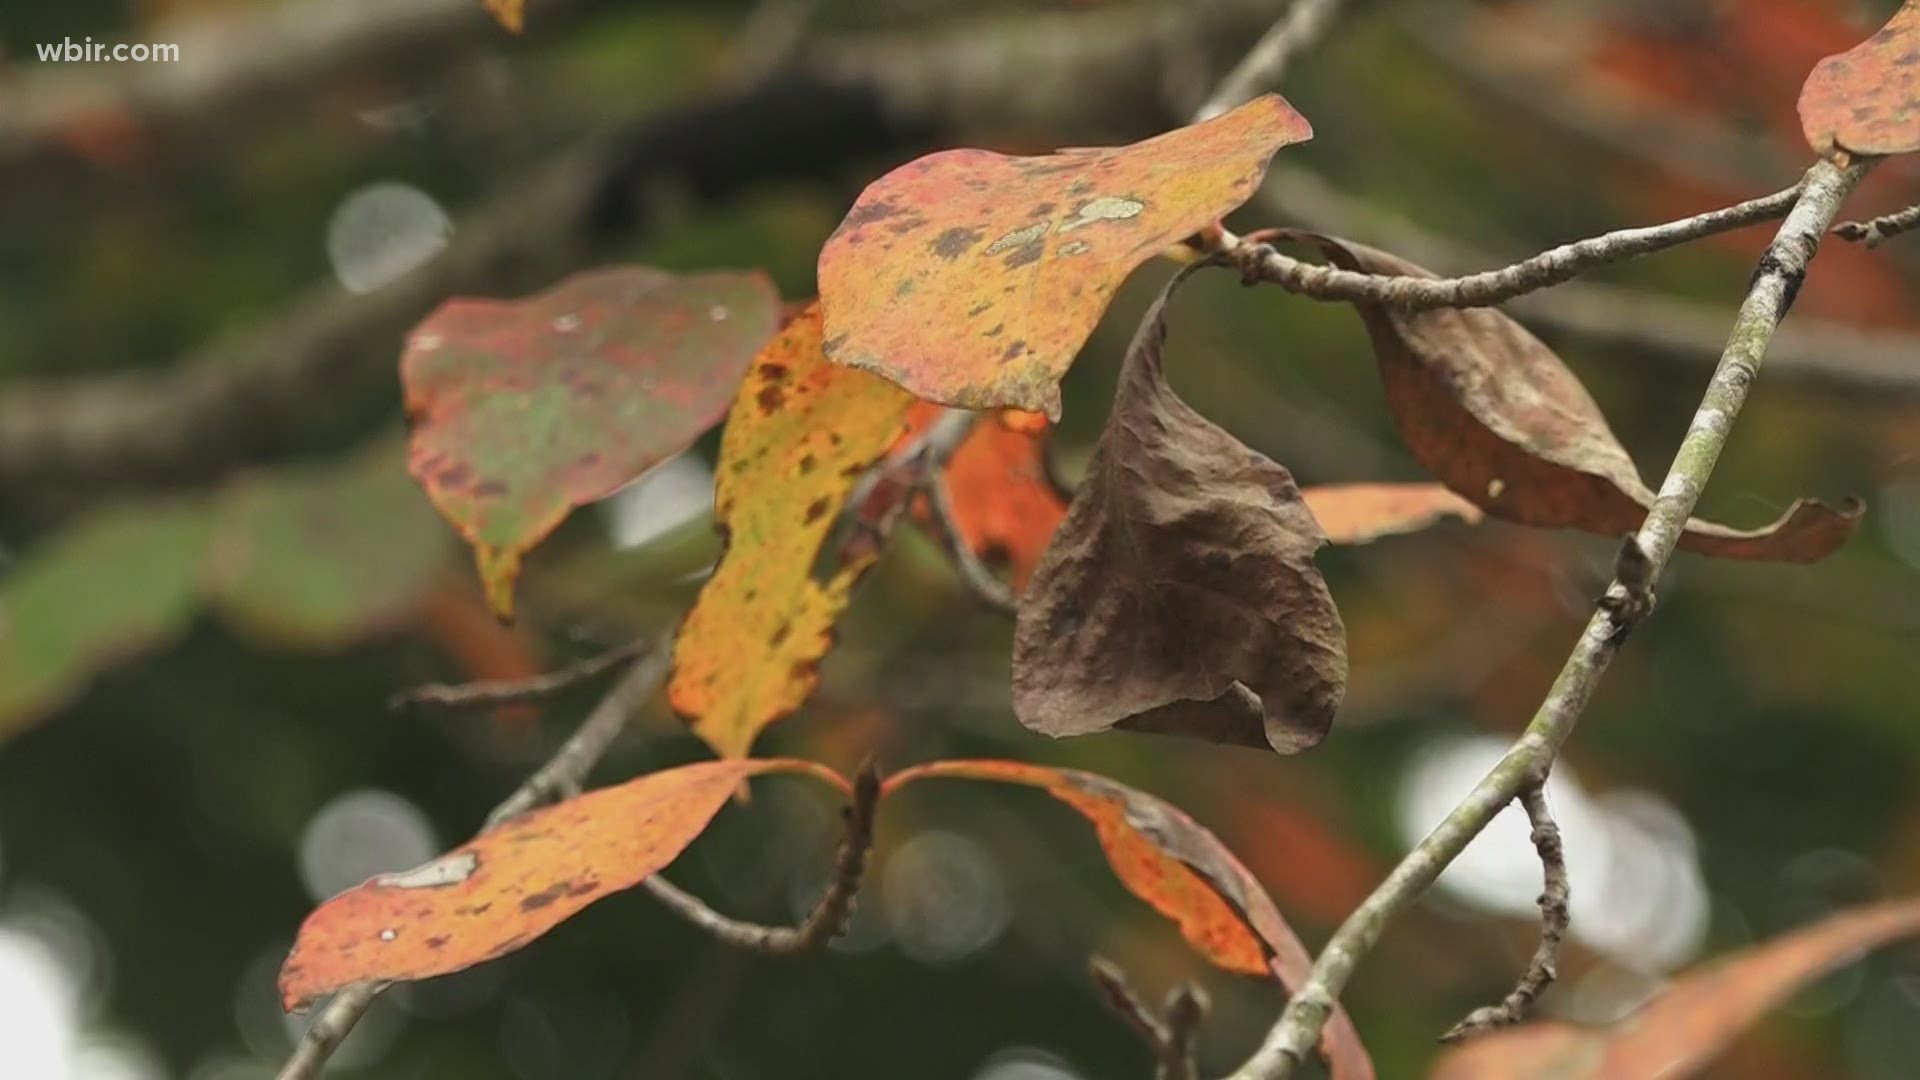 Fall colors are finally popping up around East Tennessee, bringing people to the Great Smoky Mountains to see the leaves.